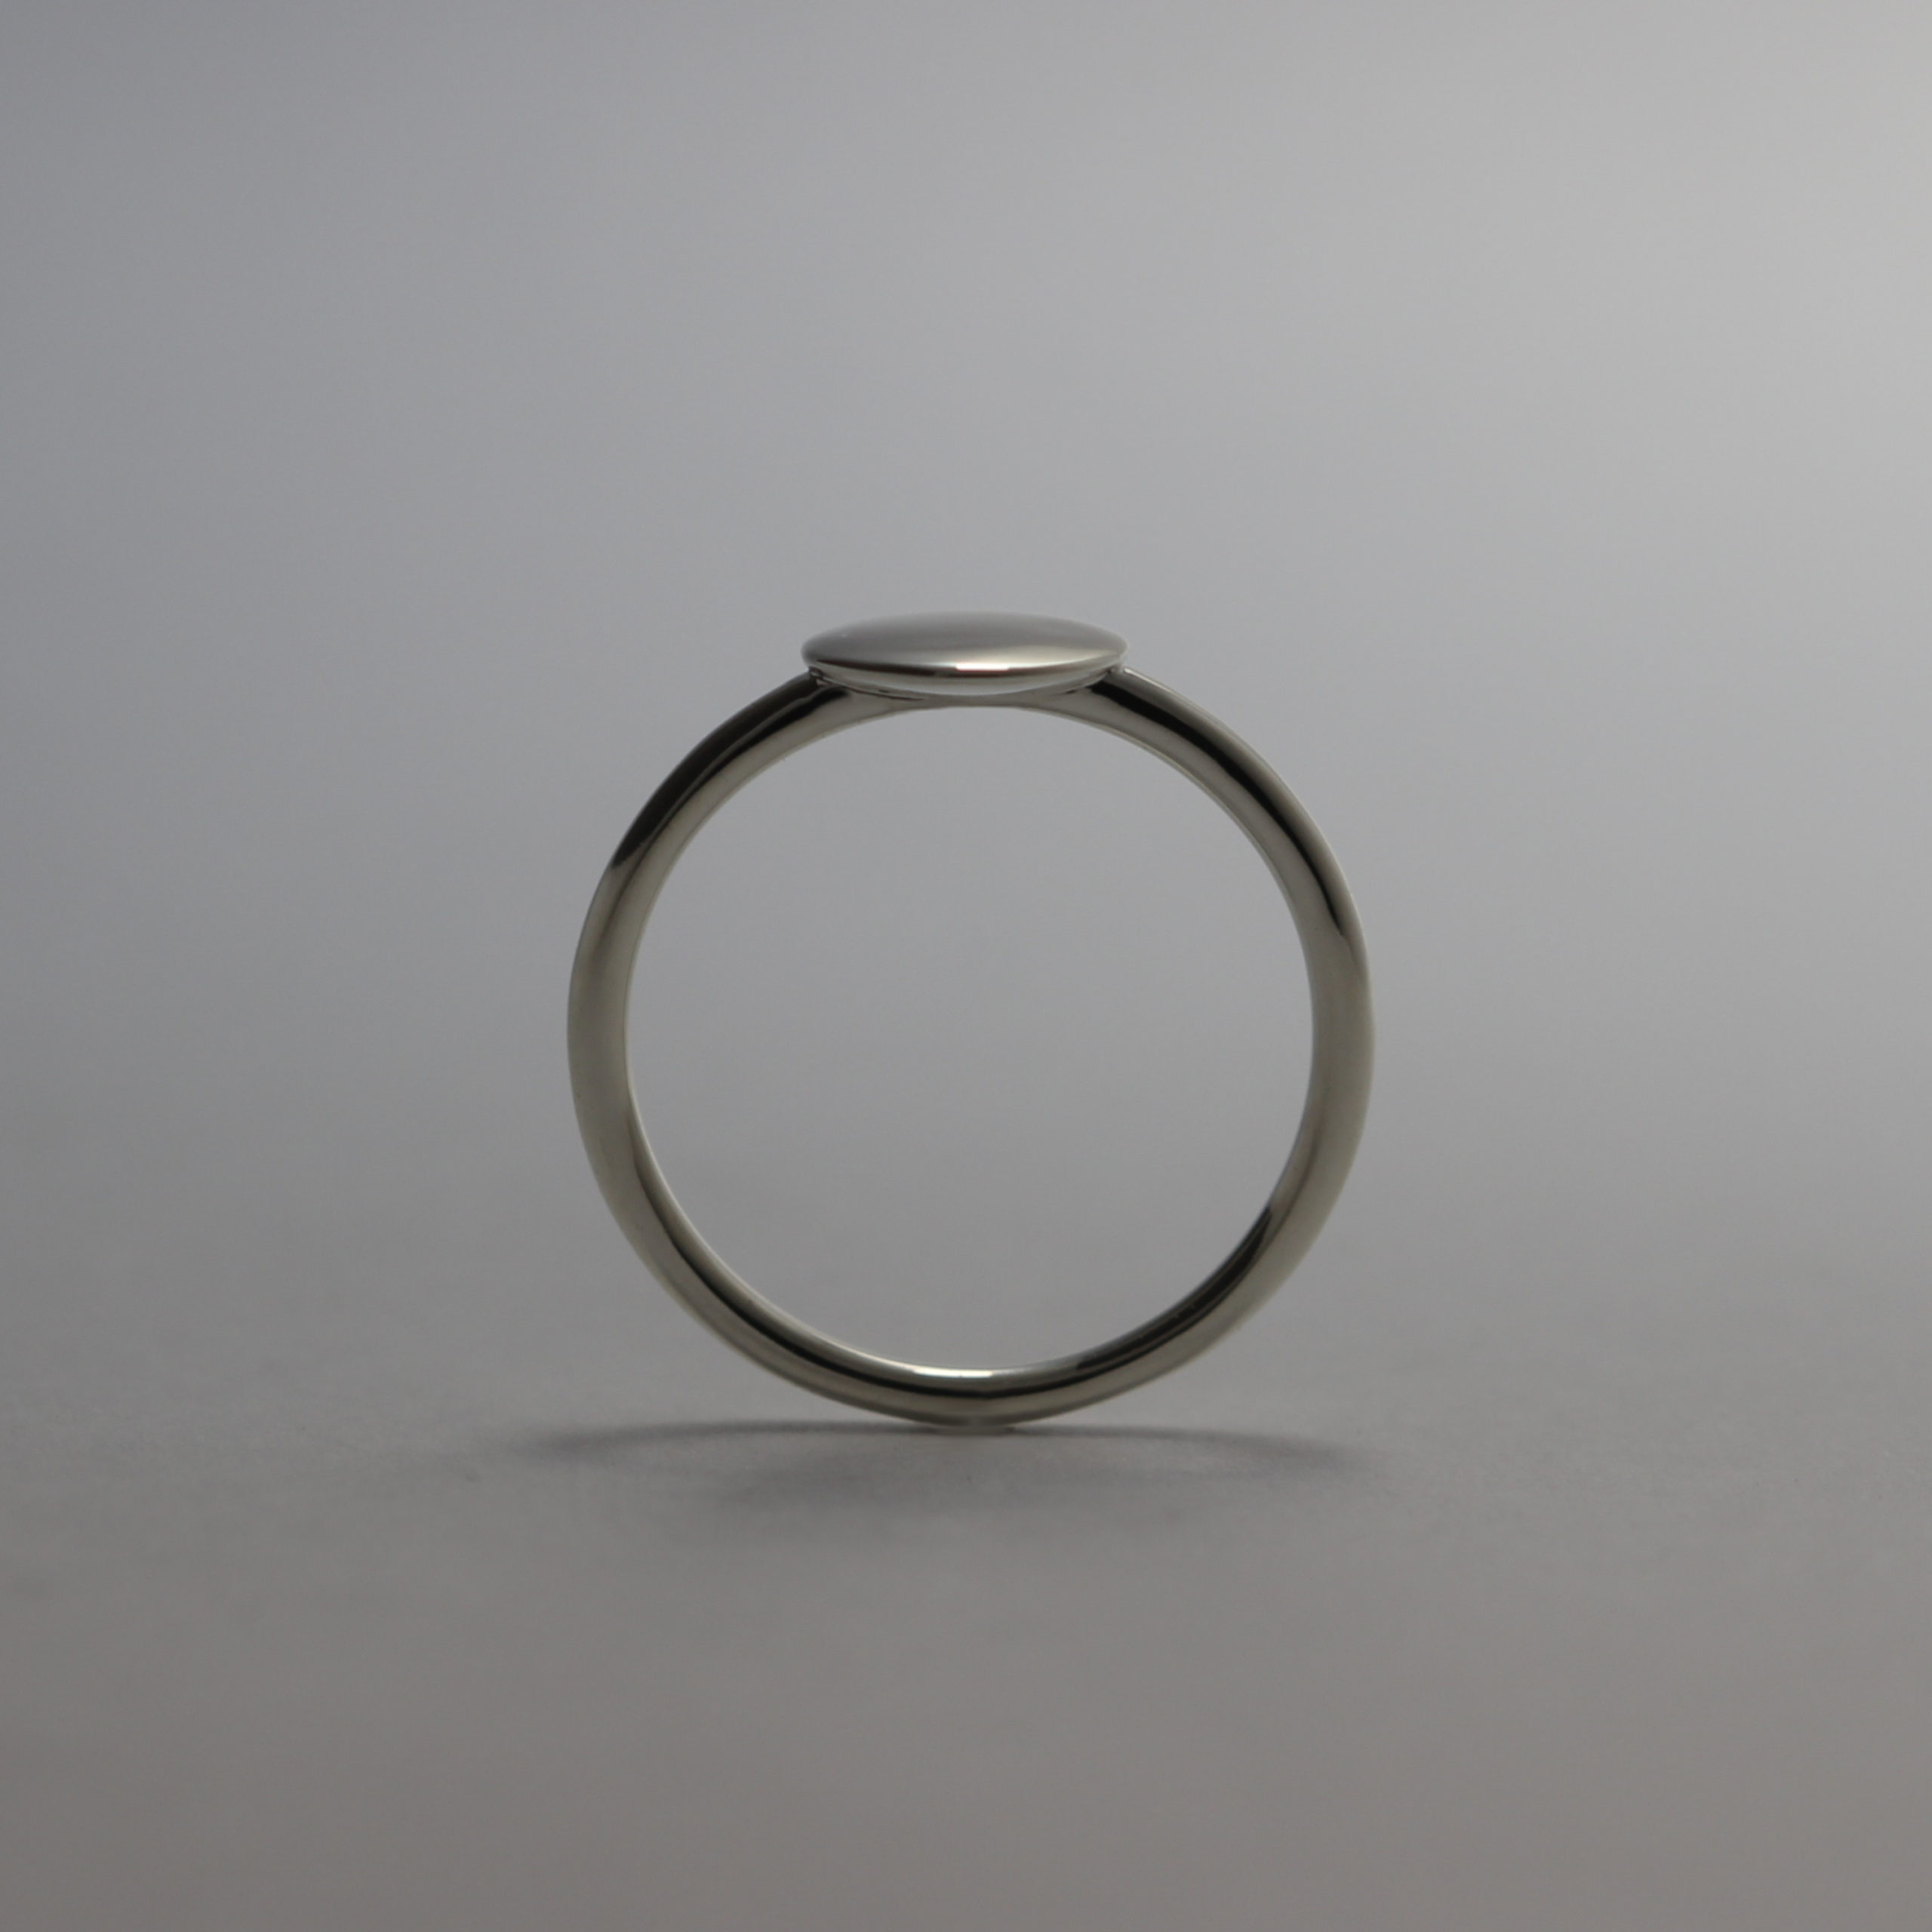 plate-ring02